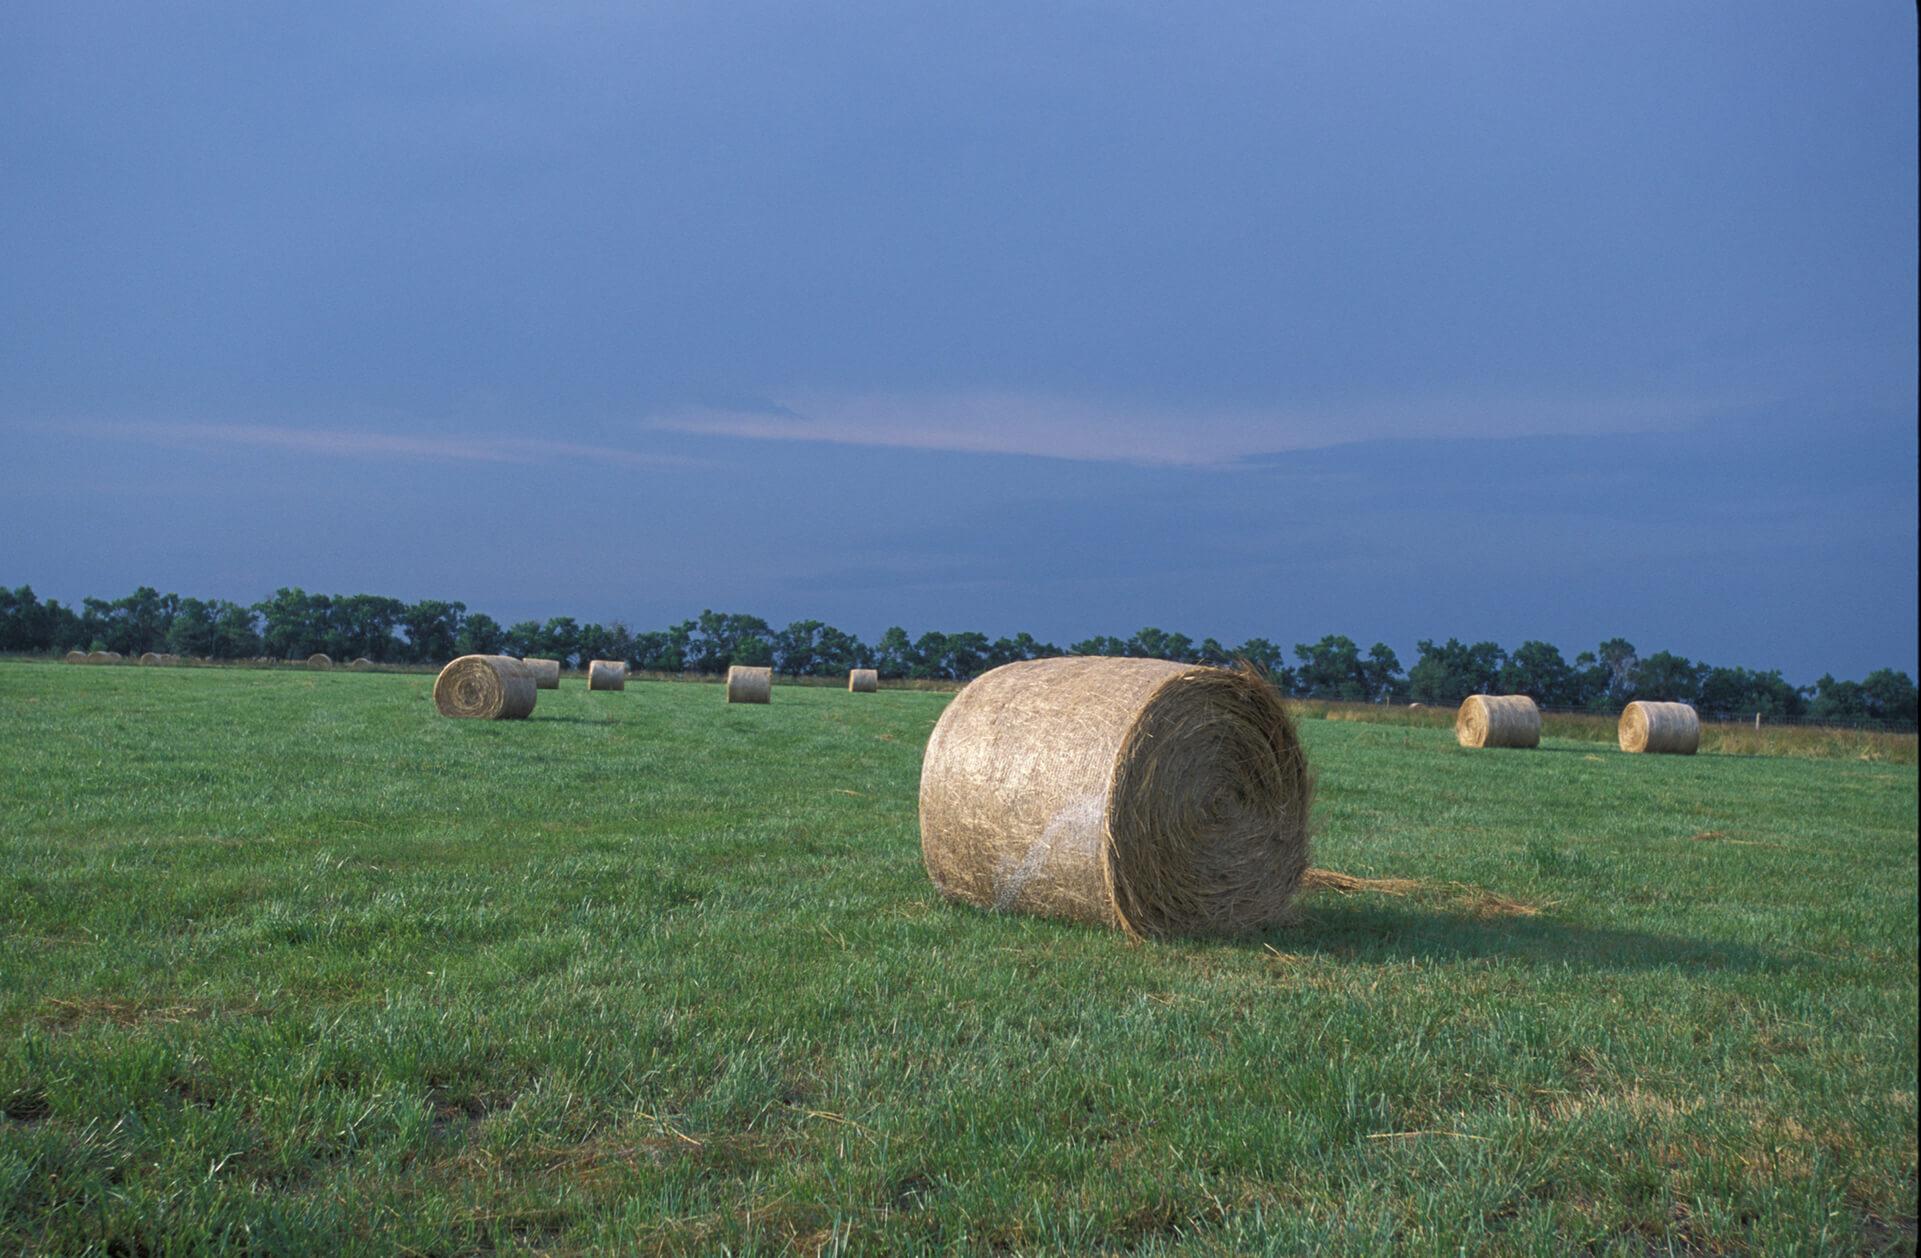 Bale of hay on a green field with a stormy sky background